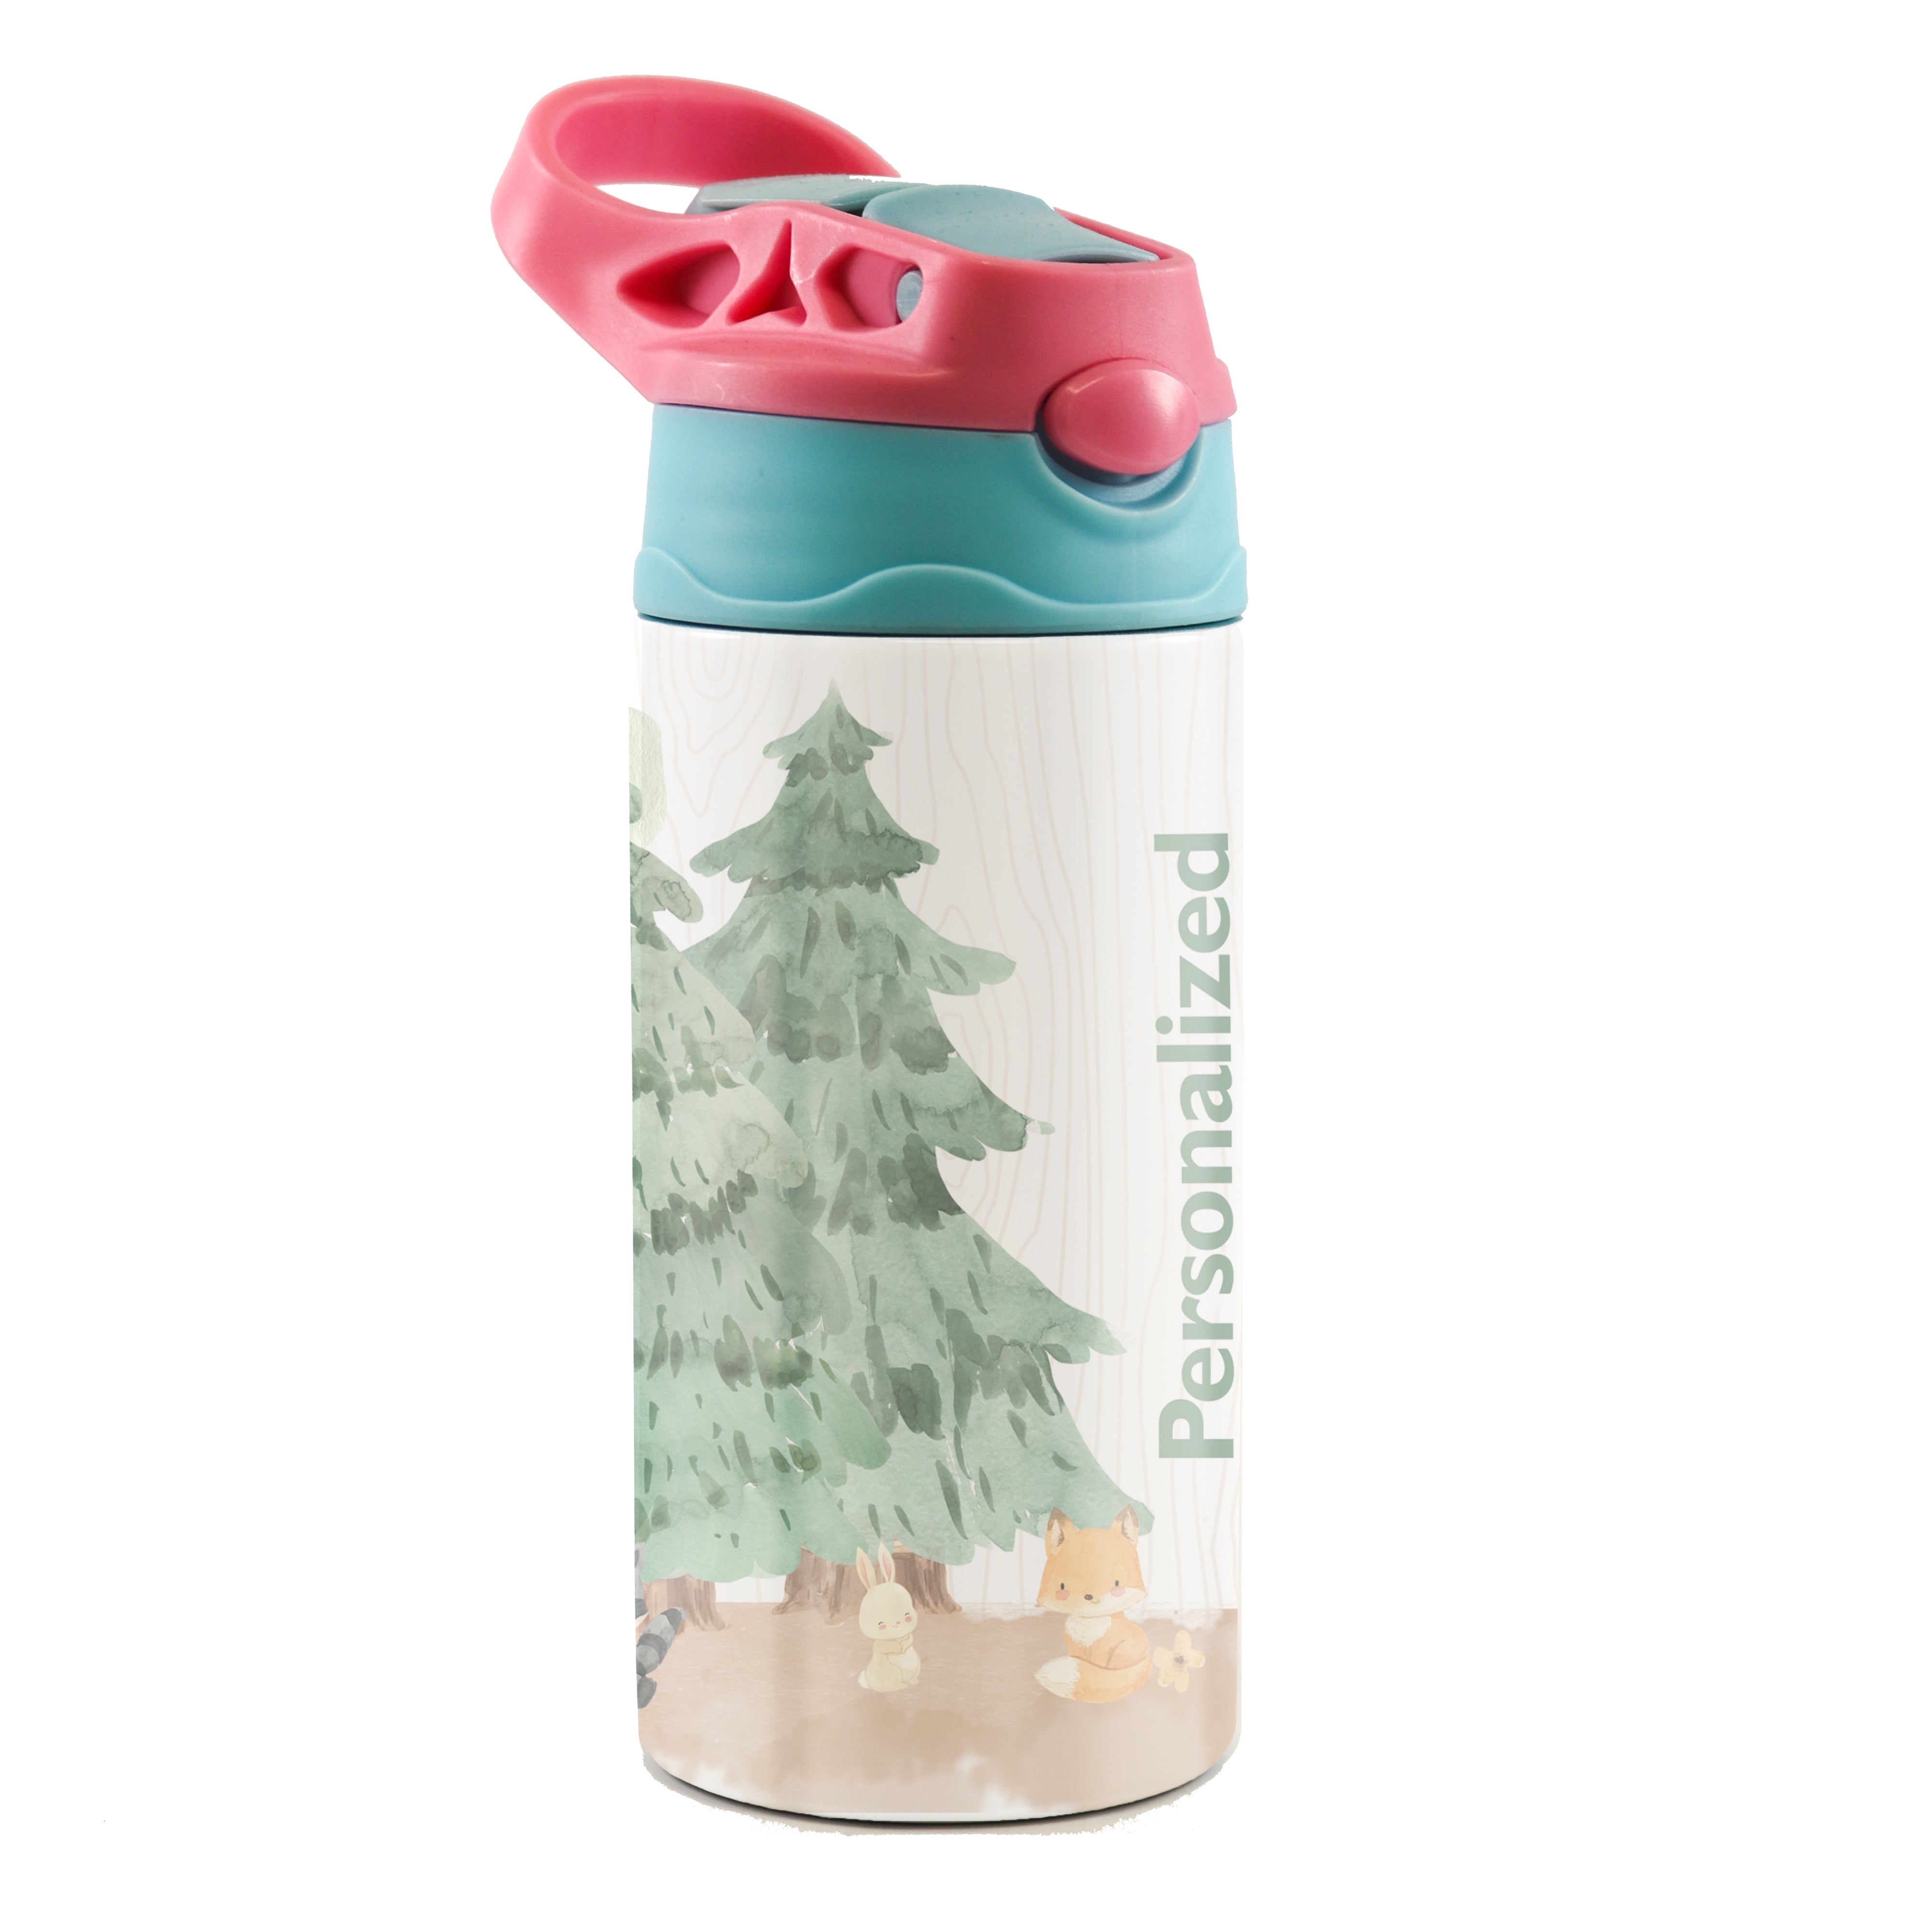 Trend Setters Original (Woodland Baby Animals - Personalize with Name) 12 oz Stainless Steel Water Bottle with Pink and Blue Lid